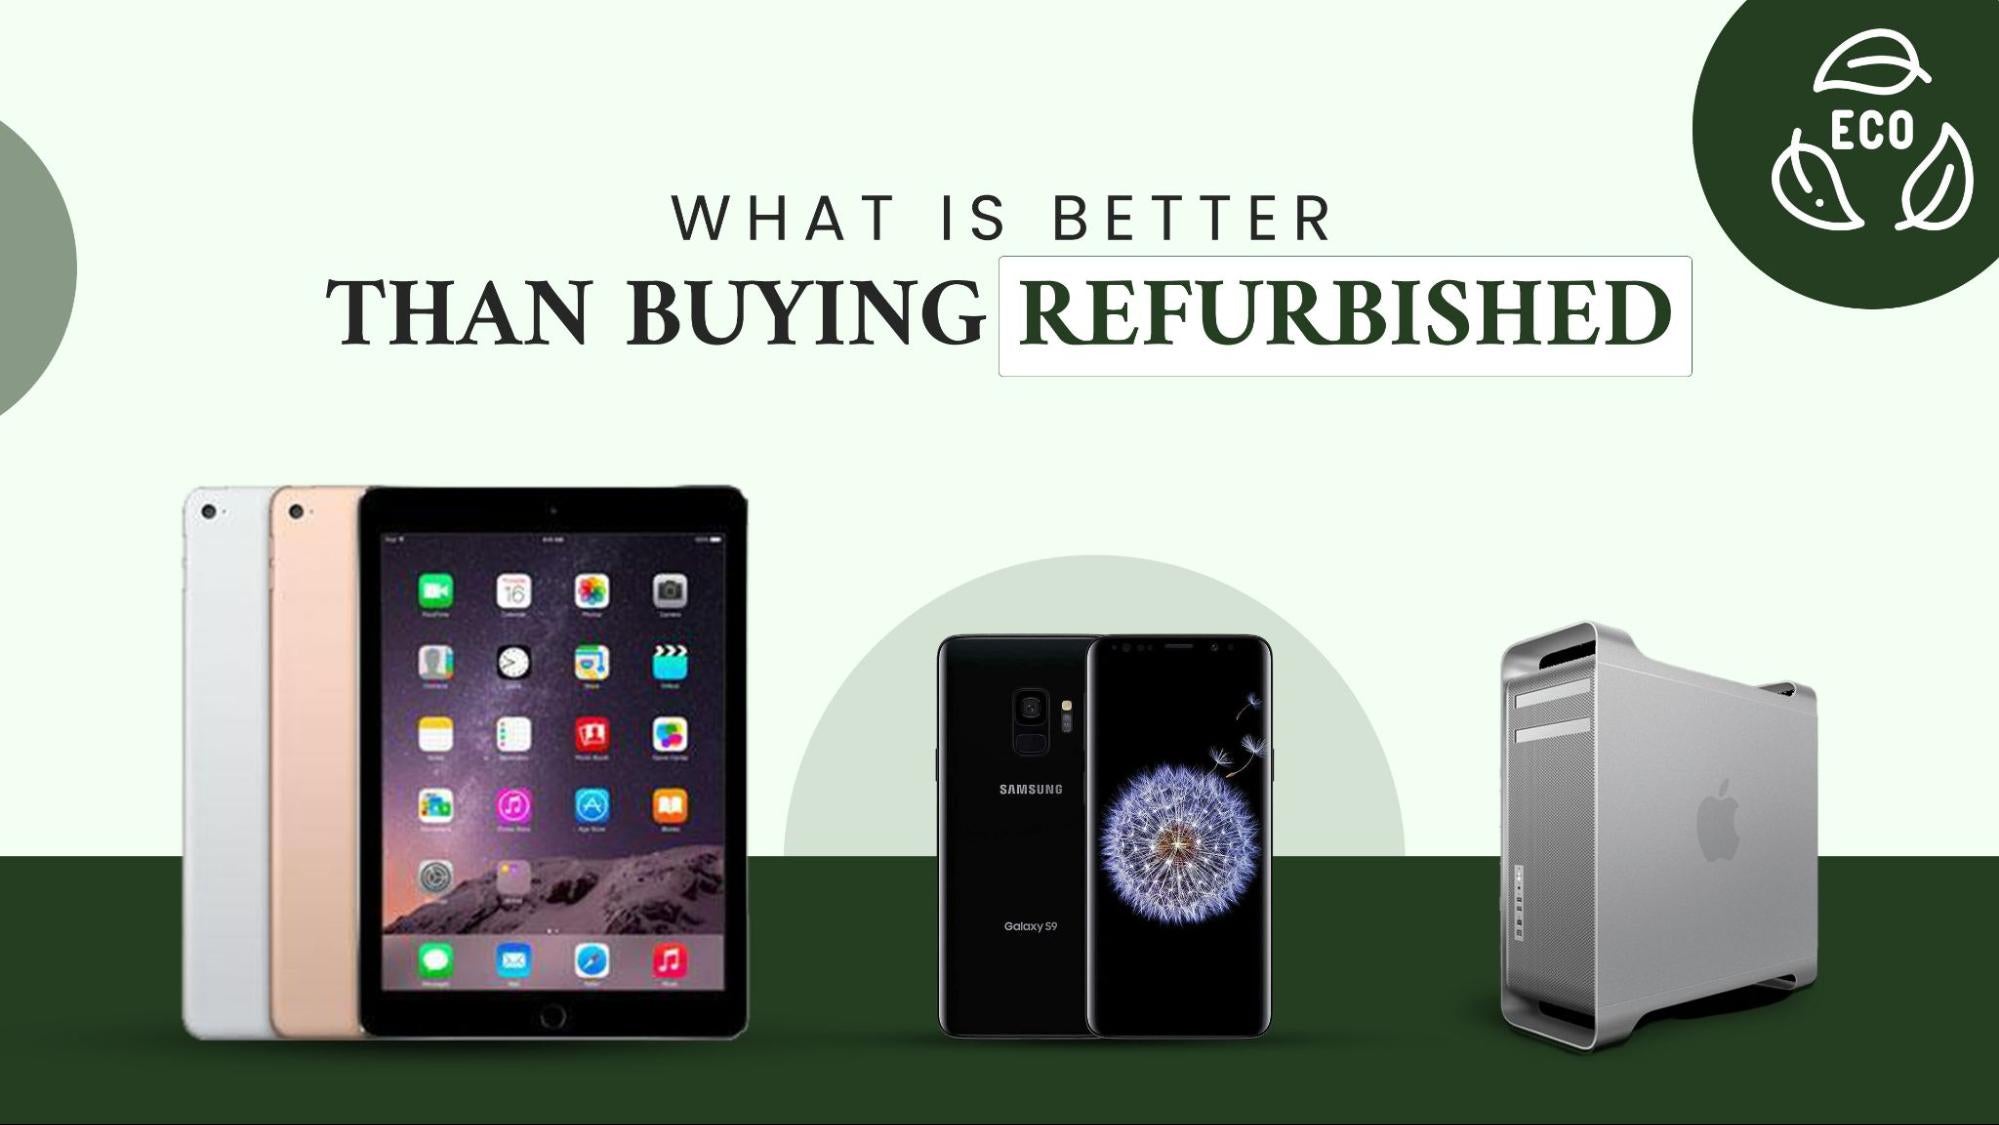 Advantages of buying refurbished over brand new